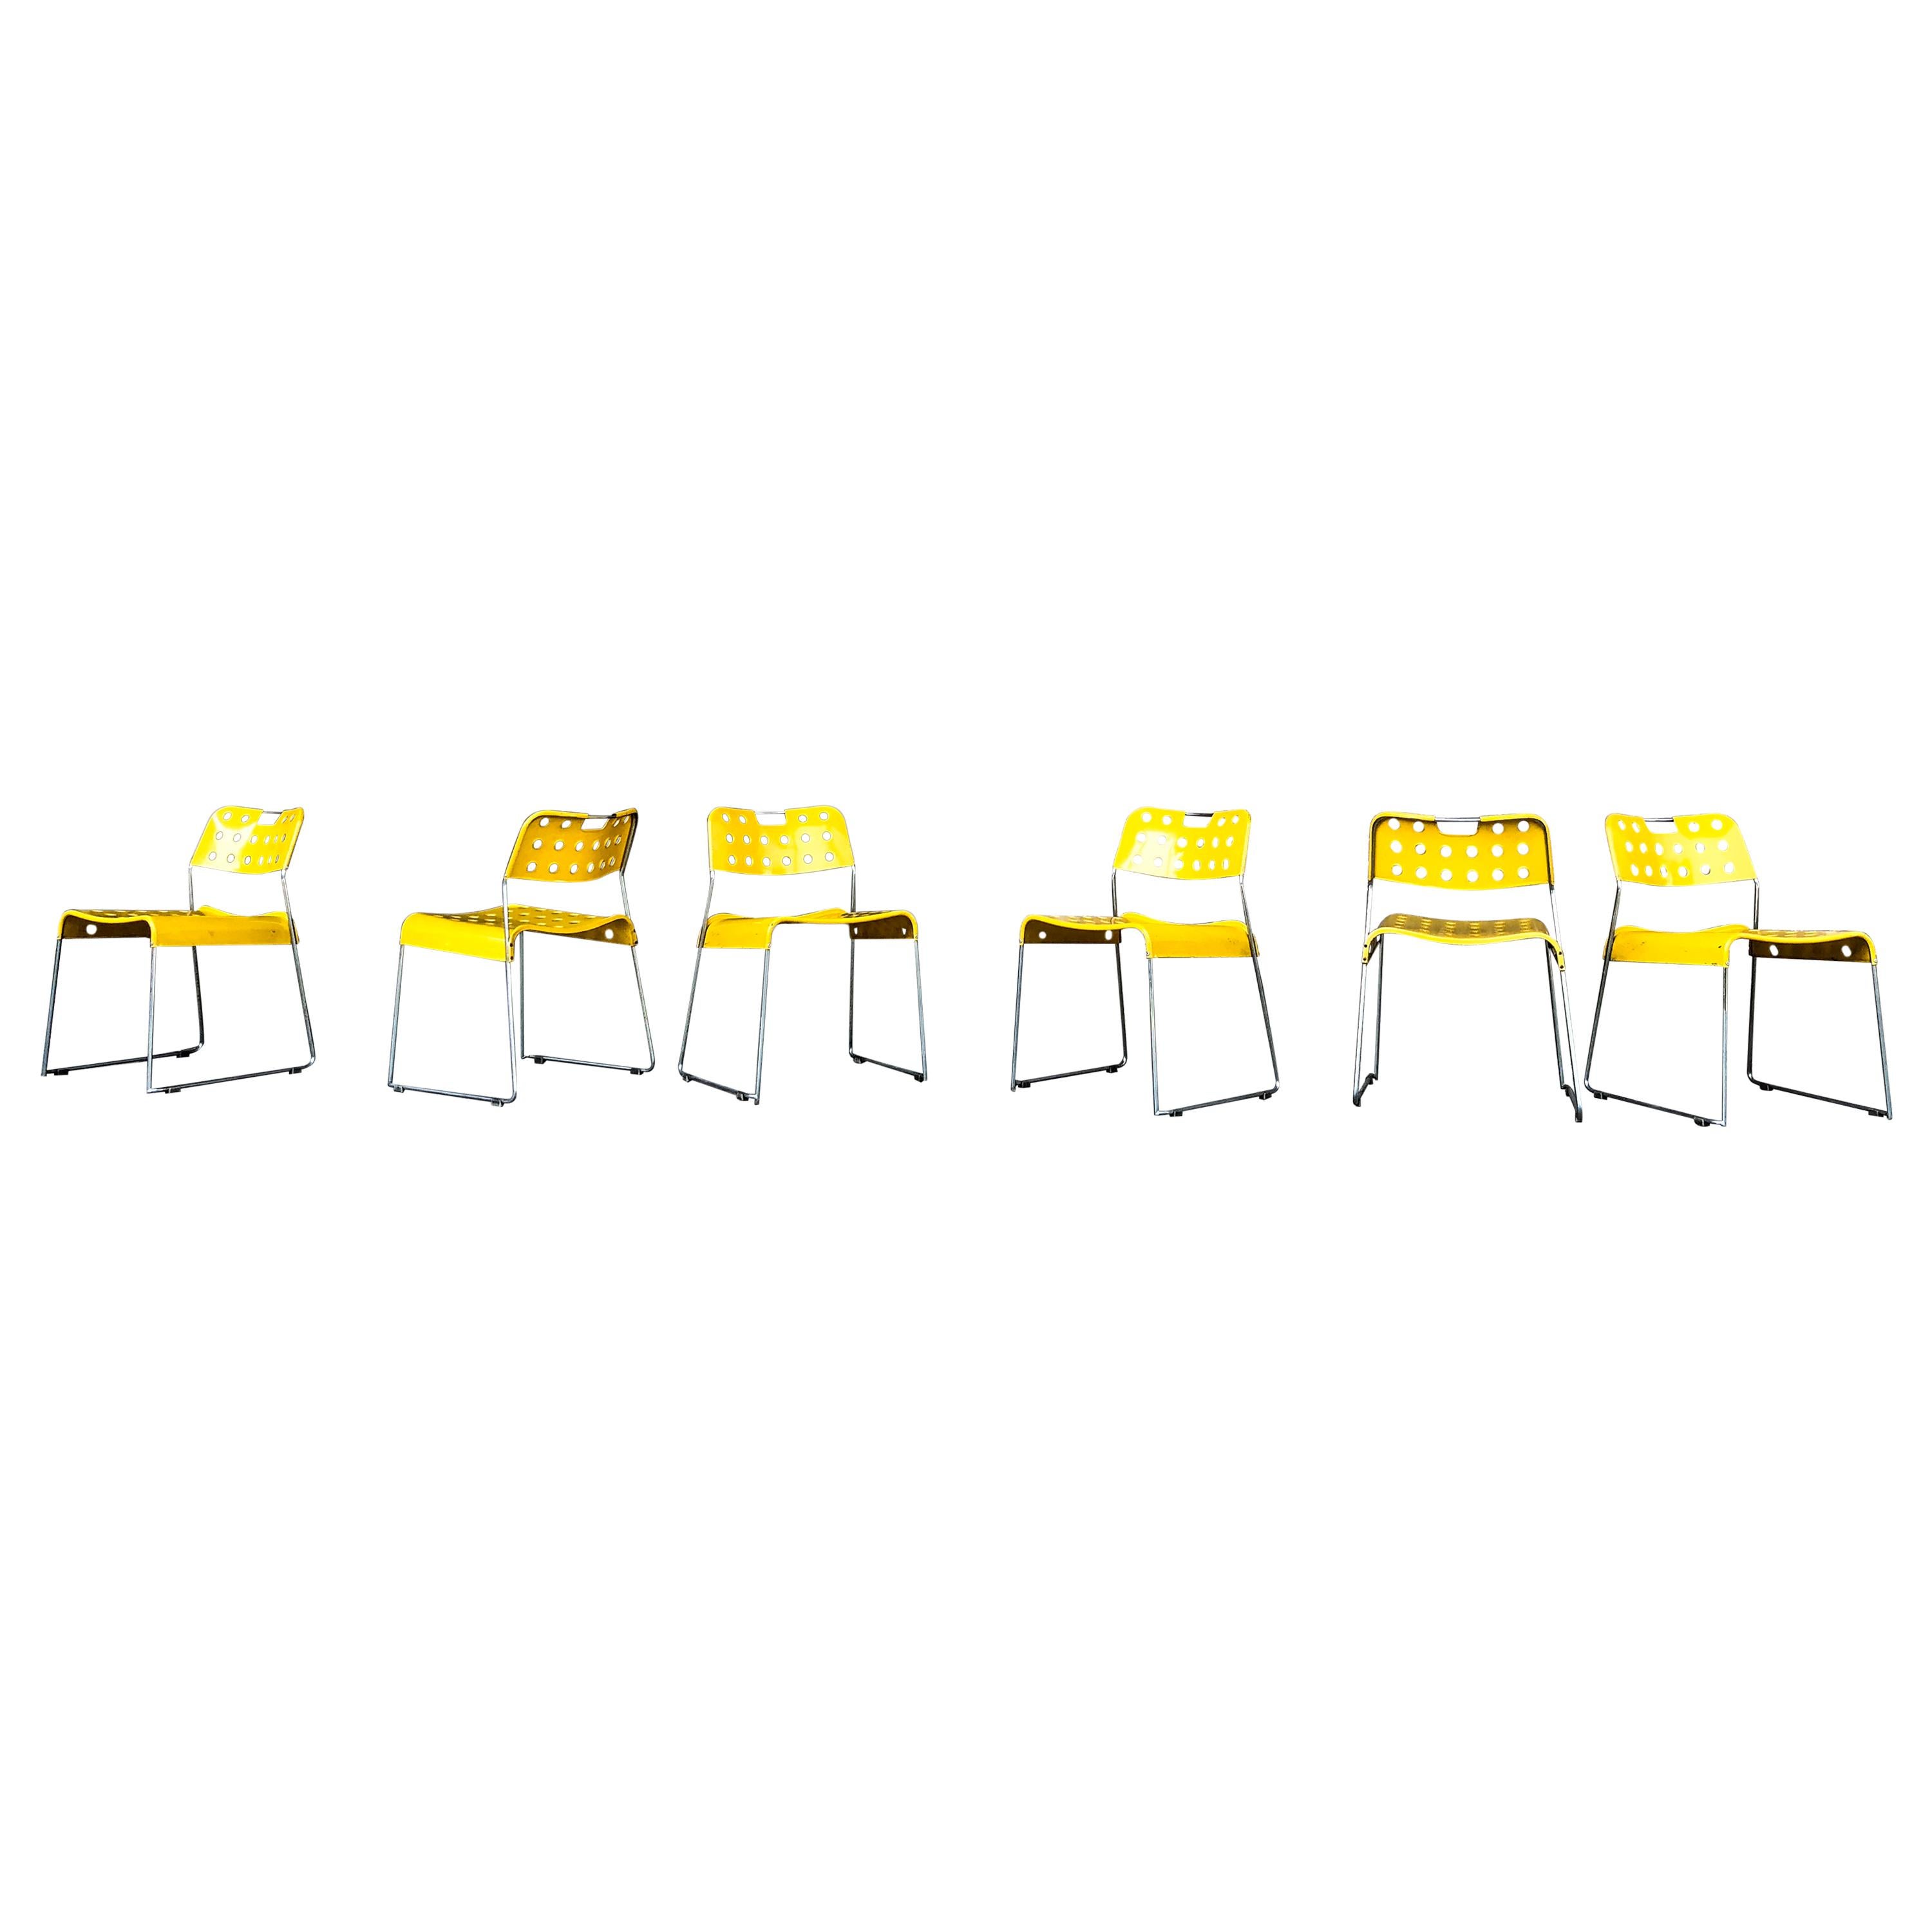 Late 20th Century Rodney Kinsman Space Age Yellow Omstak Chair for Bieffeplast, 1971, Set of 4 For Sale